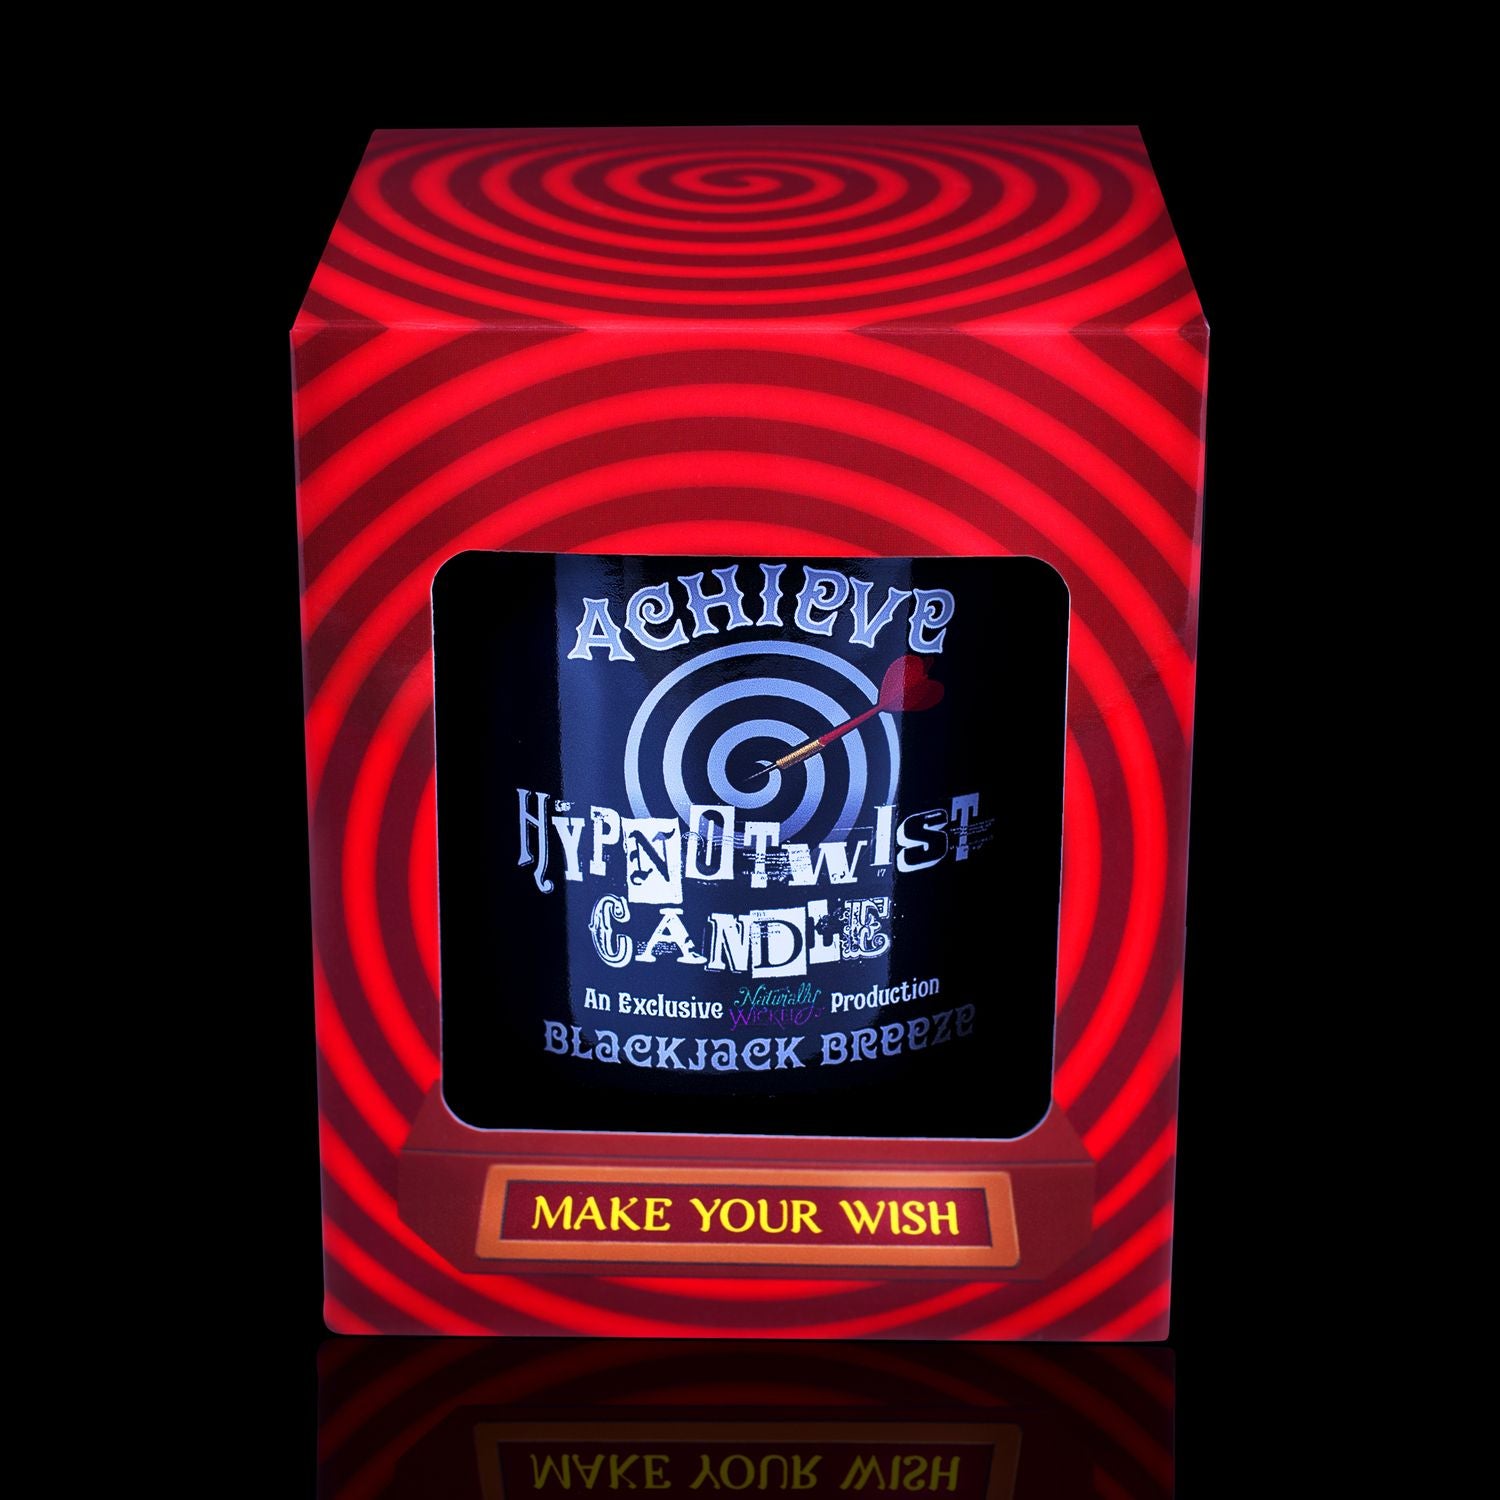 Make Your Wish With The Naturally Wicked Hypnotwist Achieve Candle, Plant-based Soy Black Wax Scented With Blackjack Breeze, Including A Zebra Jasper Crystal Spinning Top, Mirrored Lid & Red Circus Hypnotic Gift Box